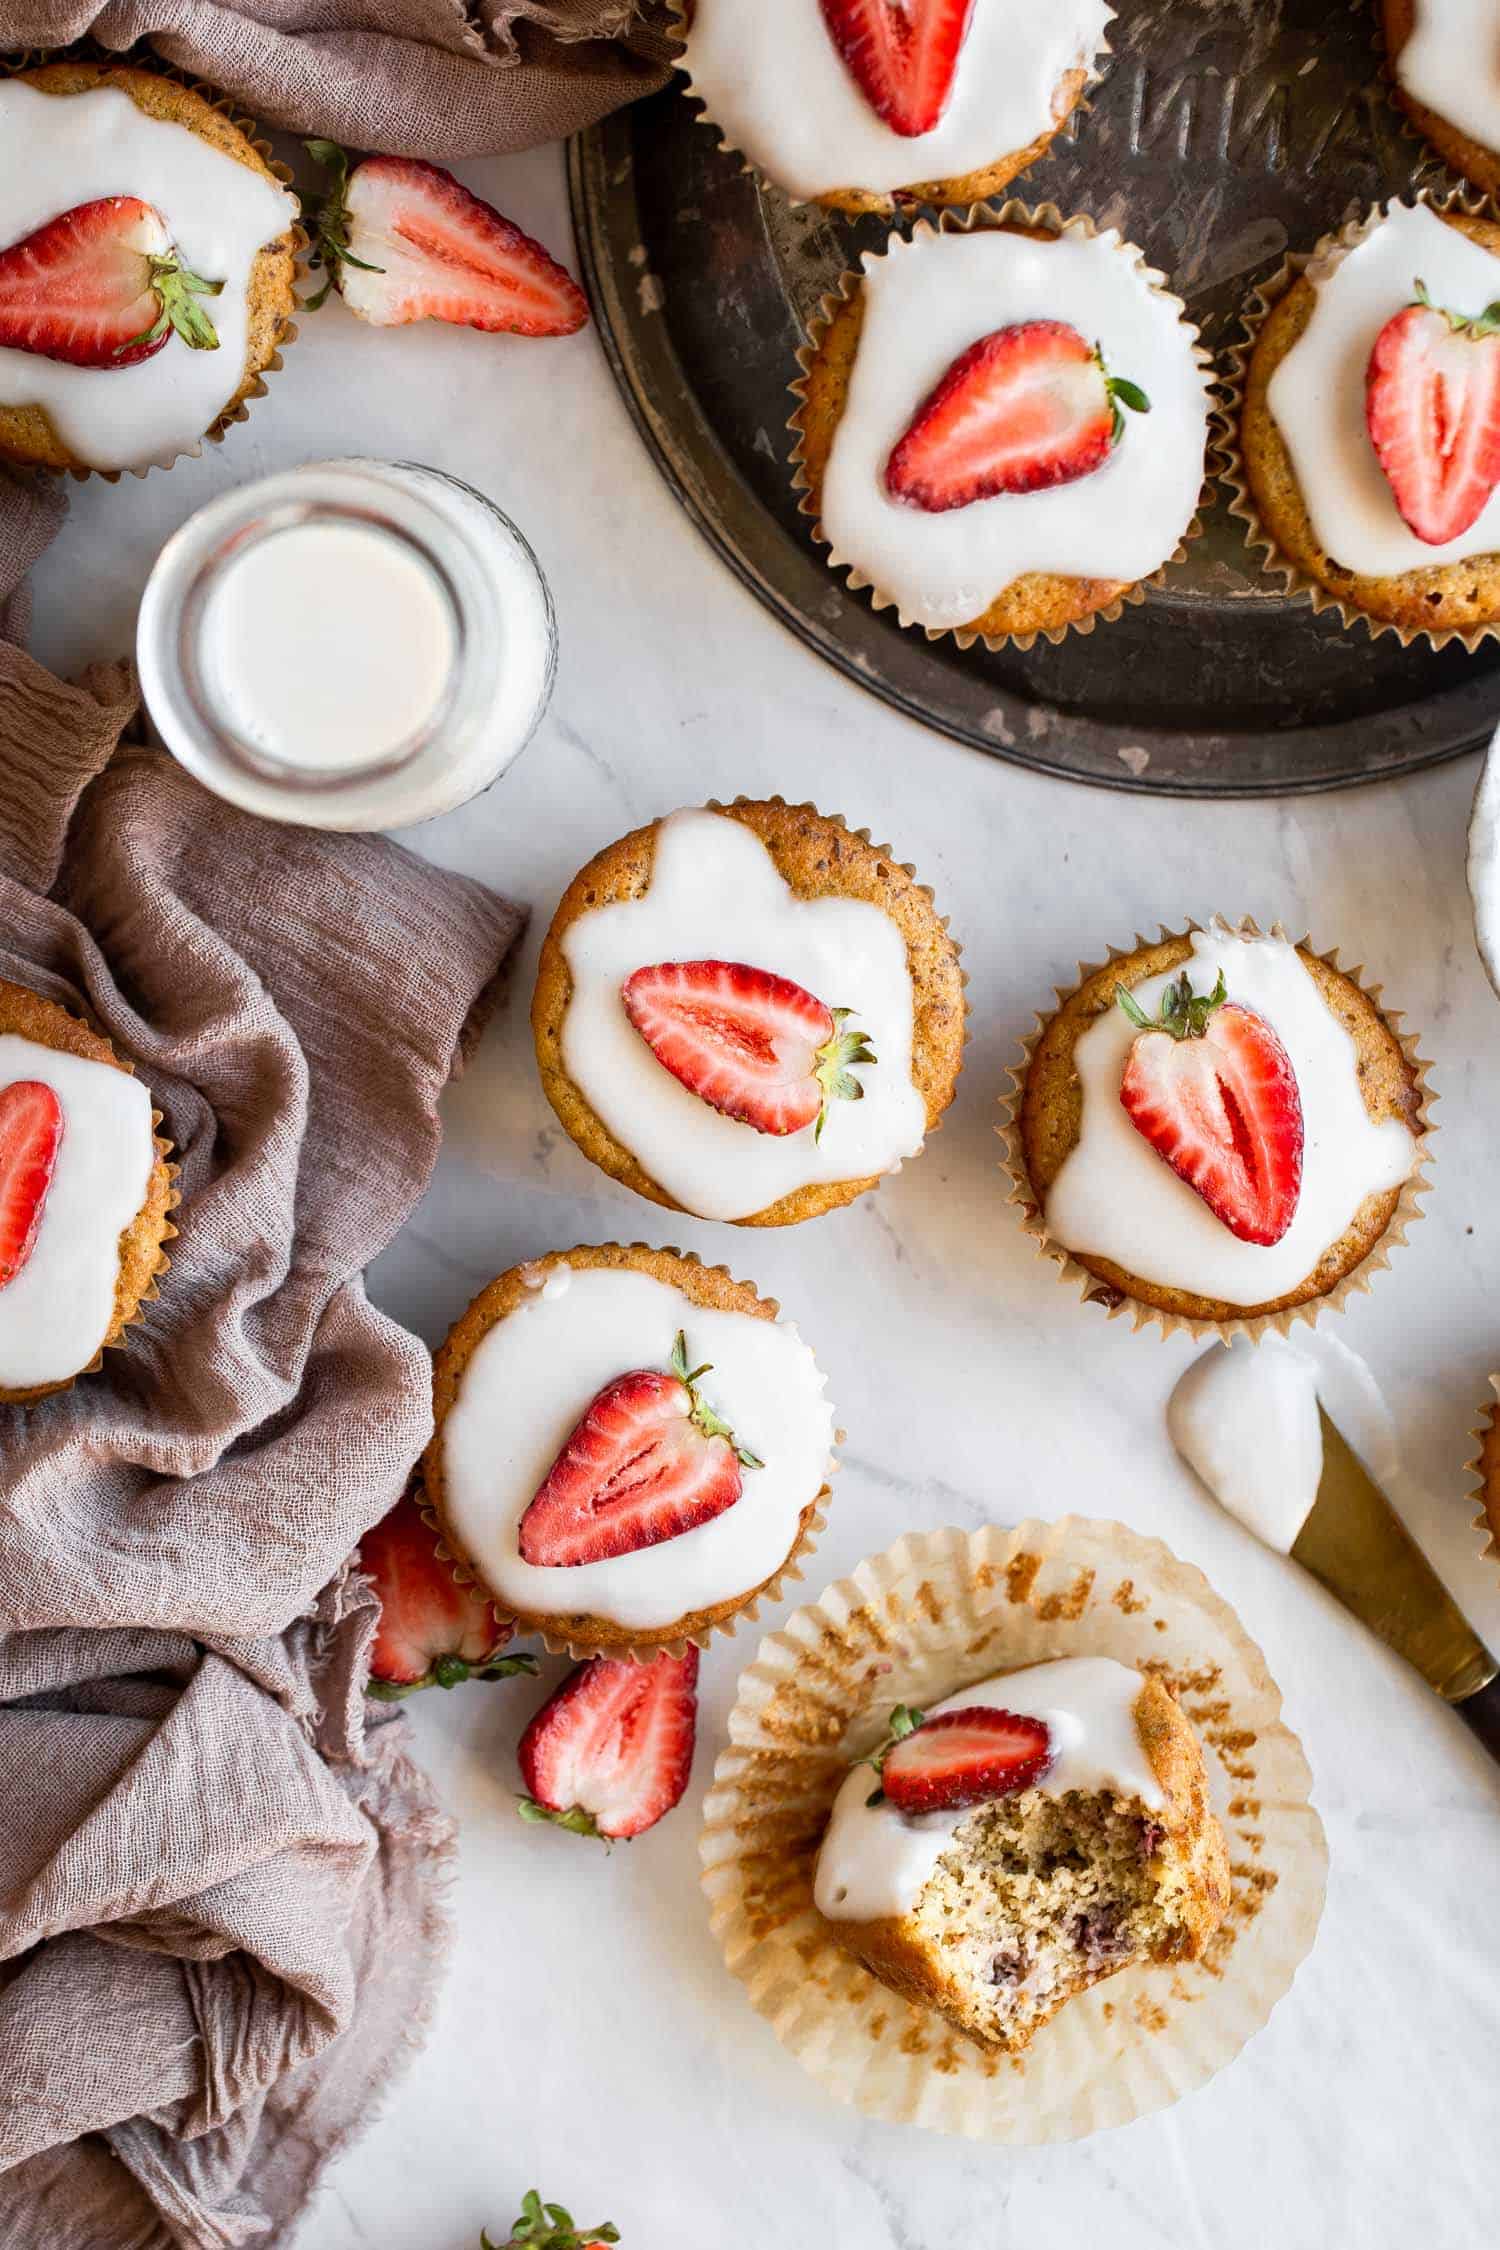 keto strawberry muffins with a linen napkin and glass of milk